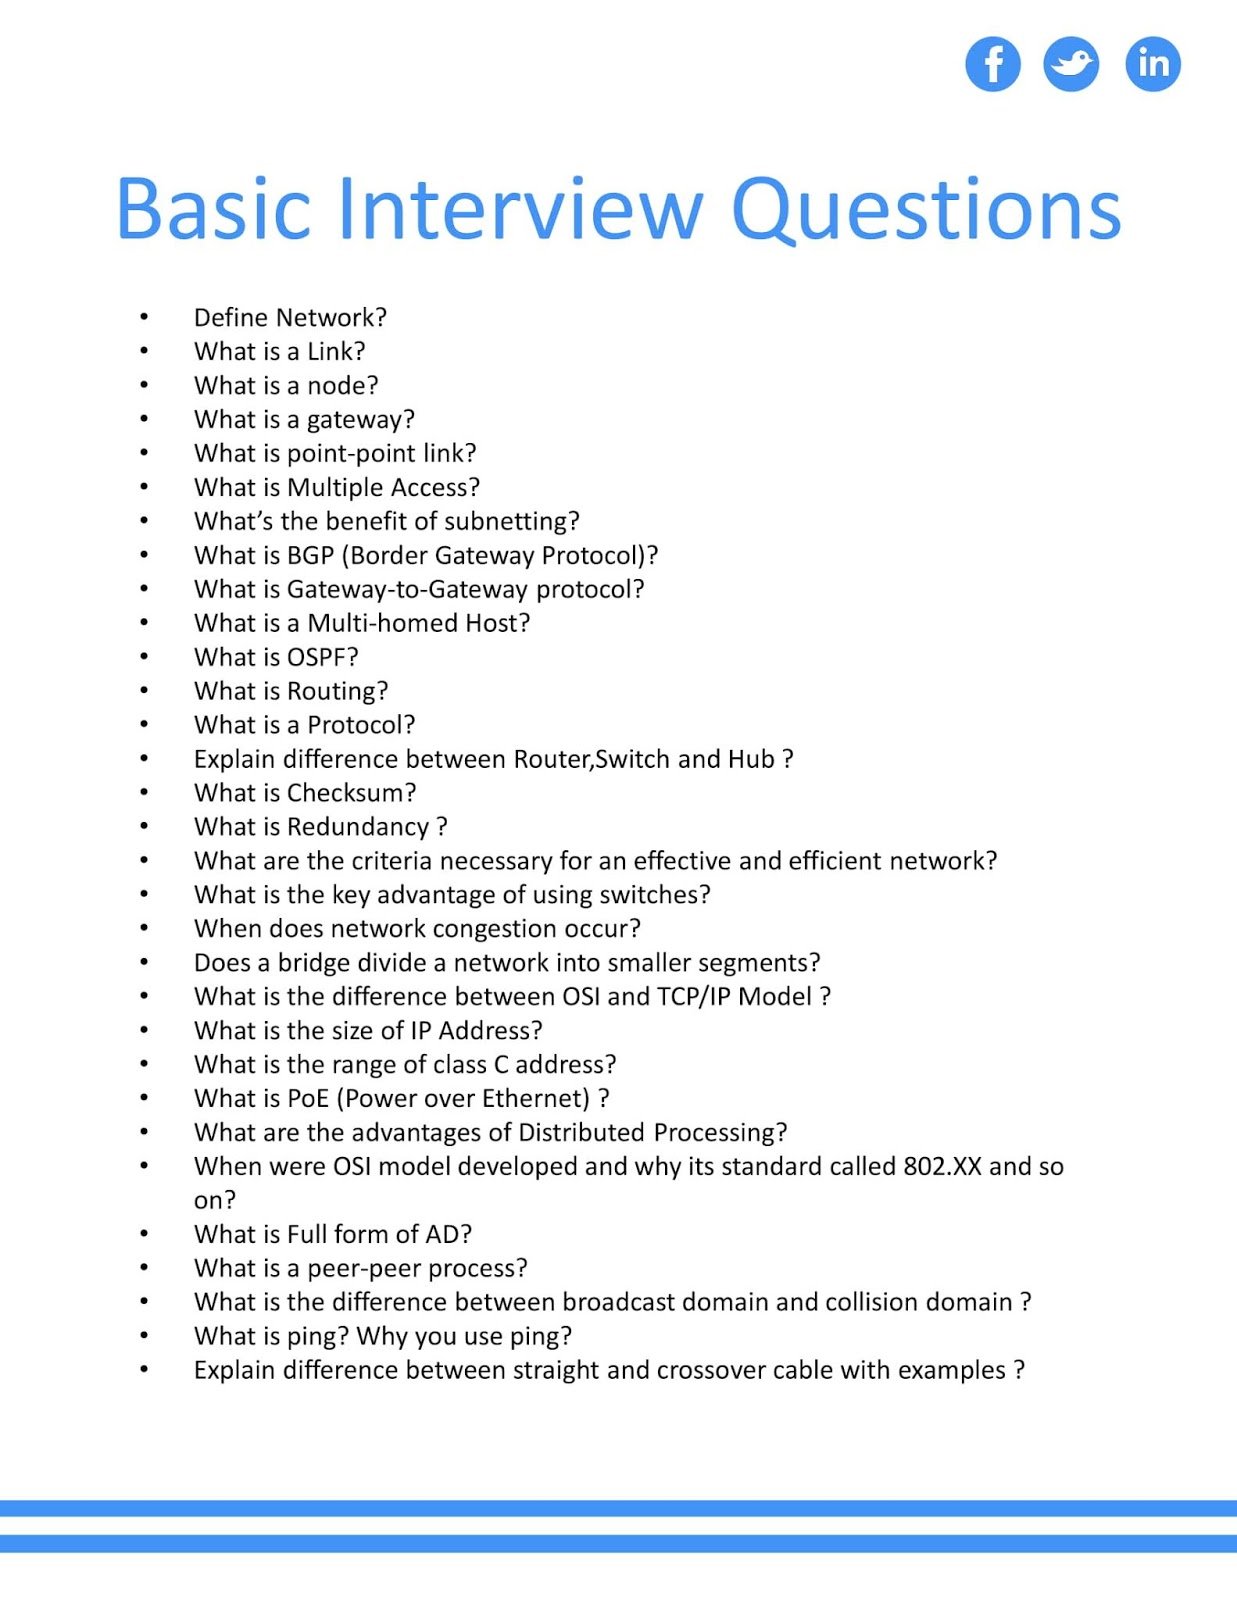 Basic Networking Interview Questions